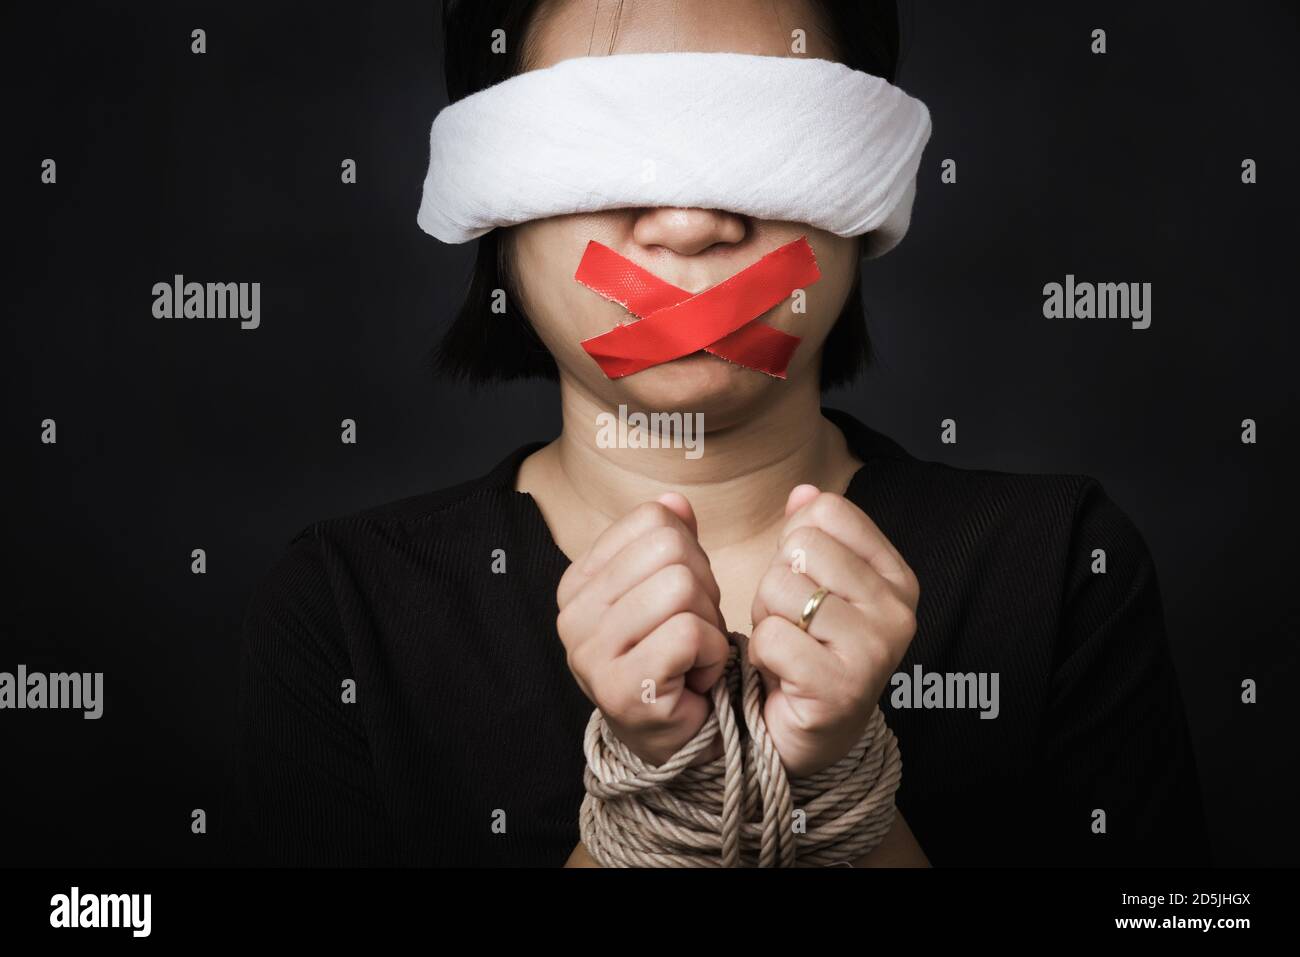 Premium Photo  Blindfolded woman closeup concept of censorship human  rights oppression or repression